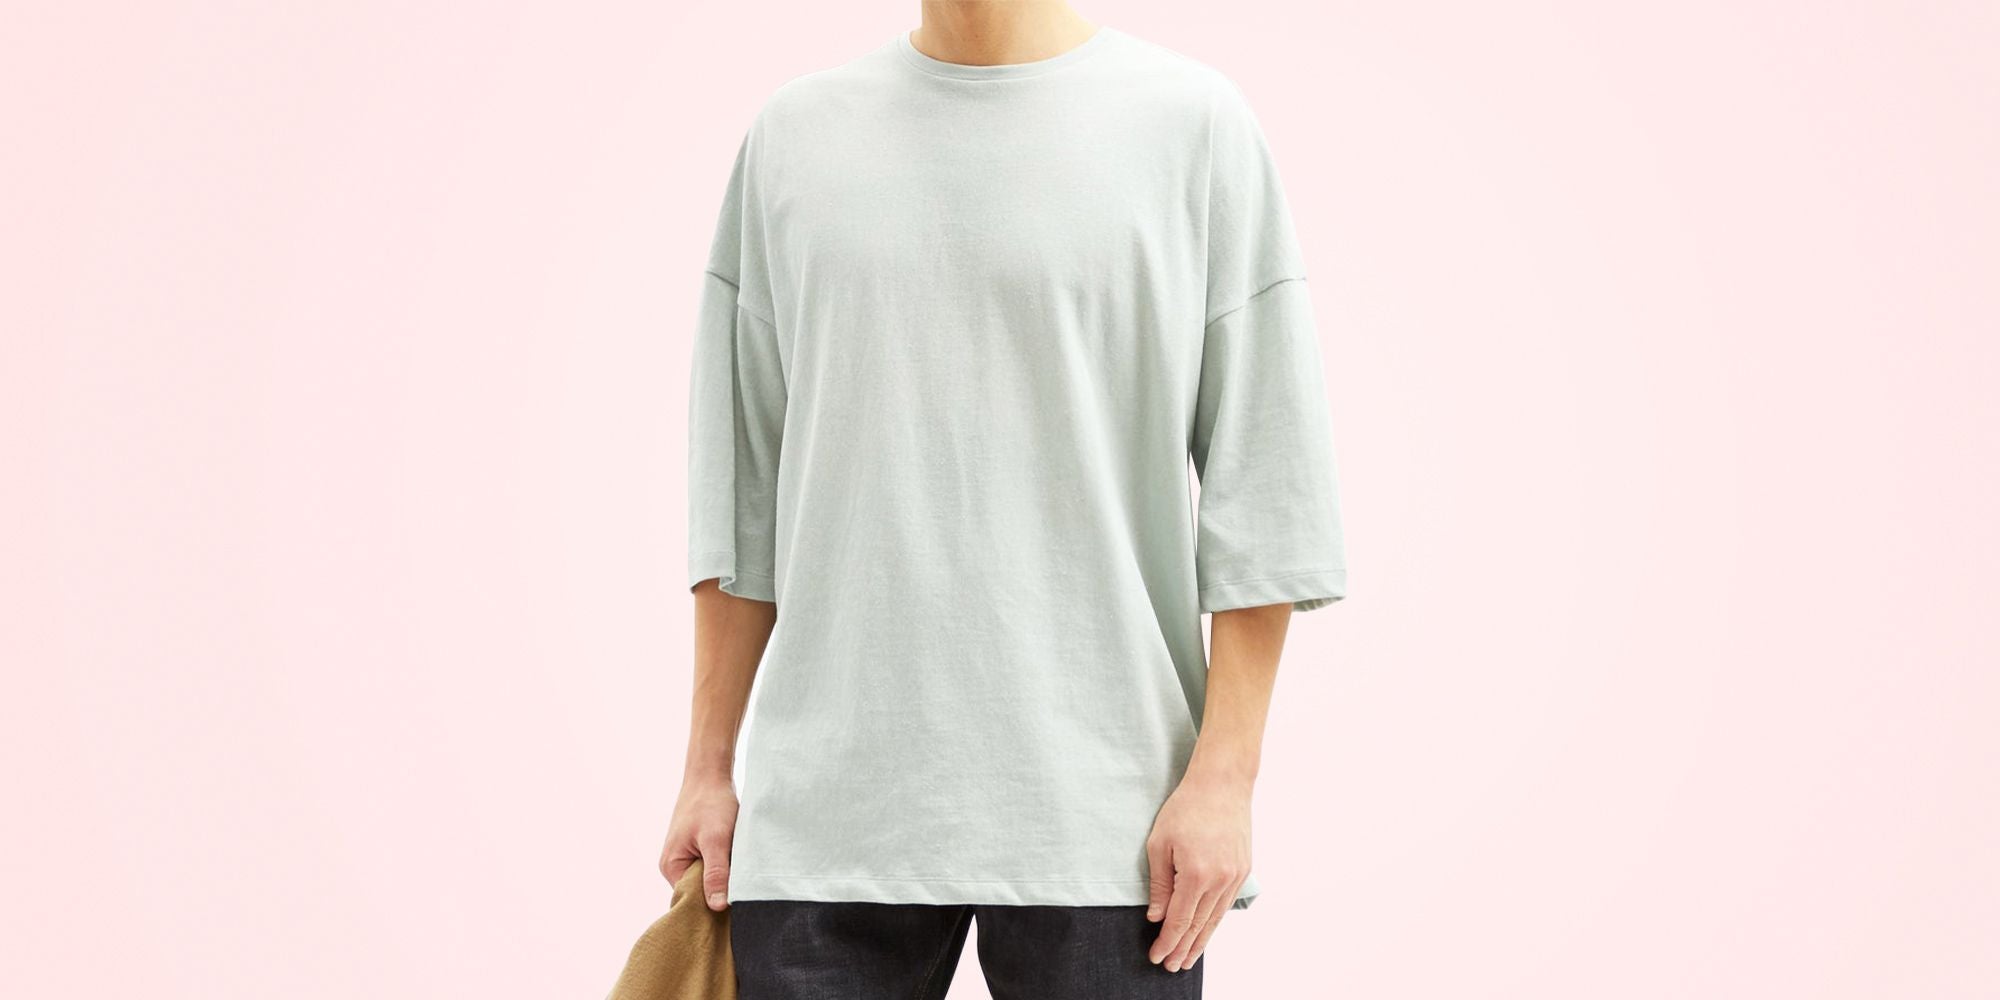 Oversize T-Shirt vs Normal T-Shirt: Which One Should You Choose?